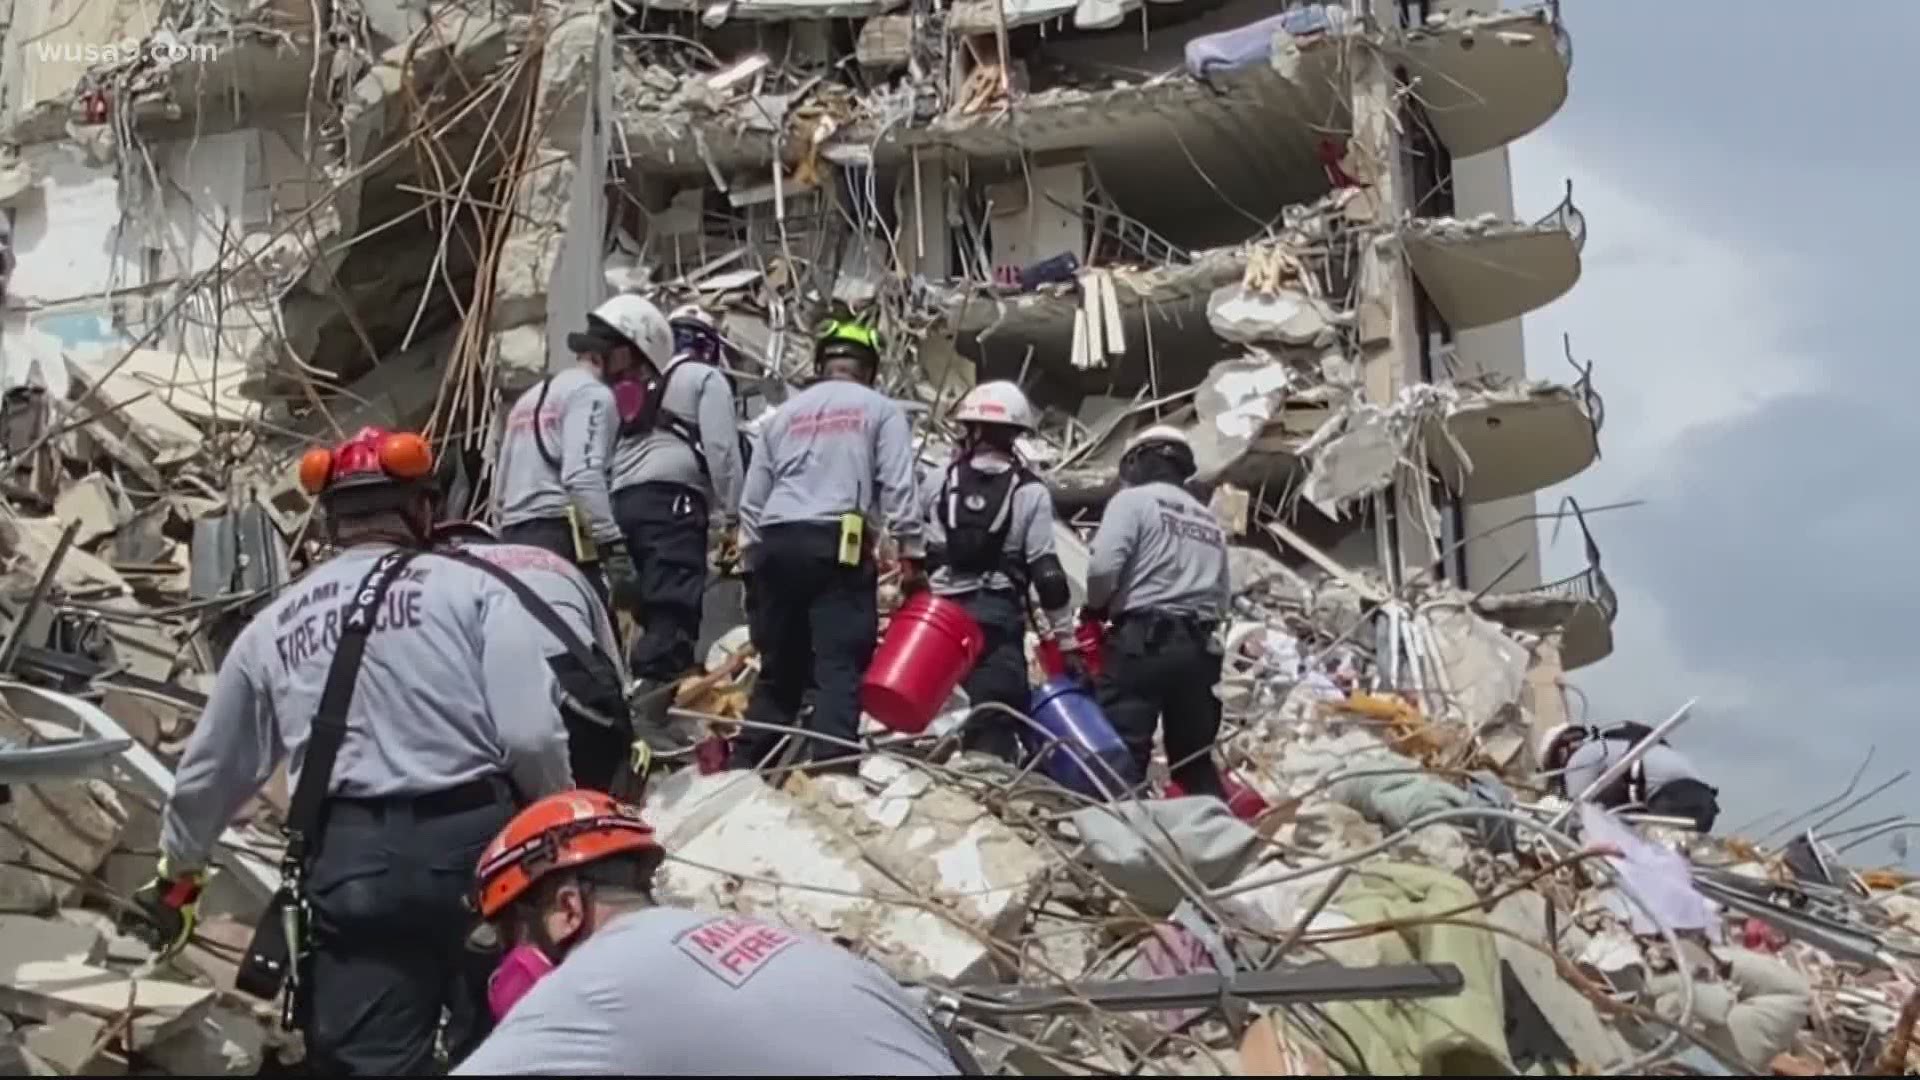 Members of the Maryland Task Force 1 showcased their tools and training to help find people trapped in rubble.